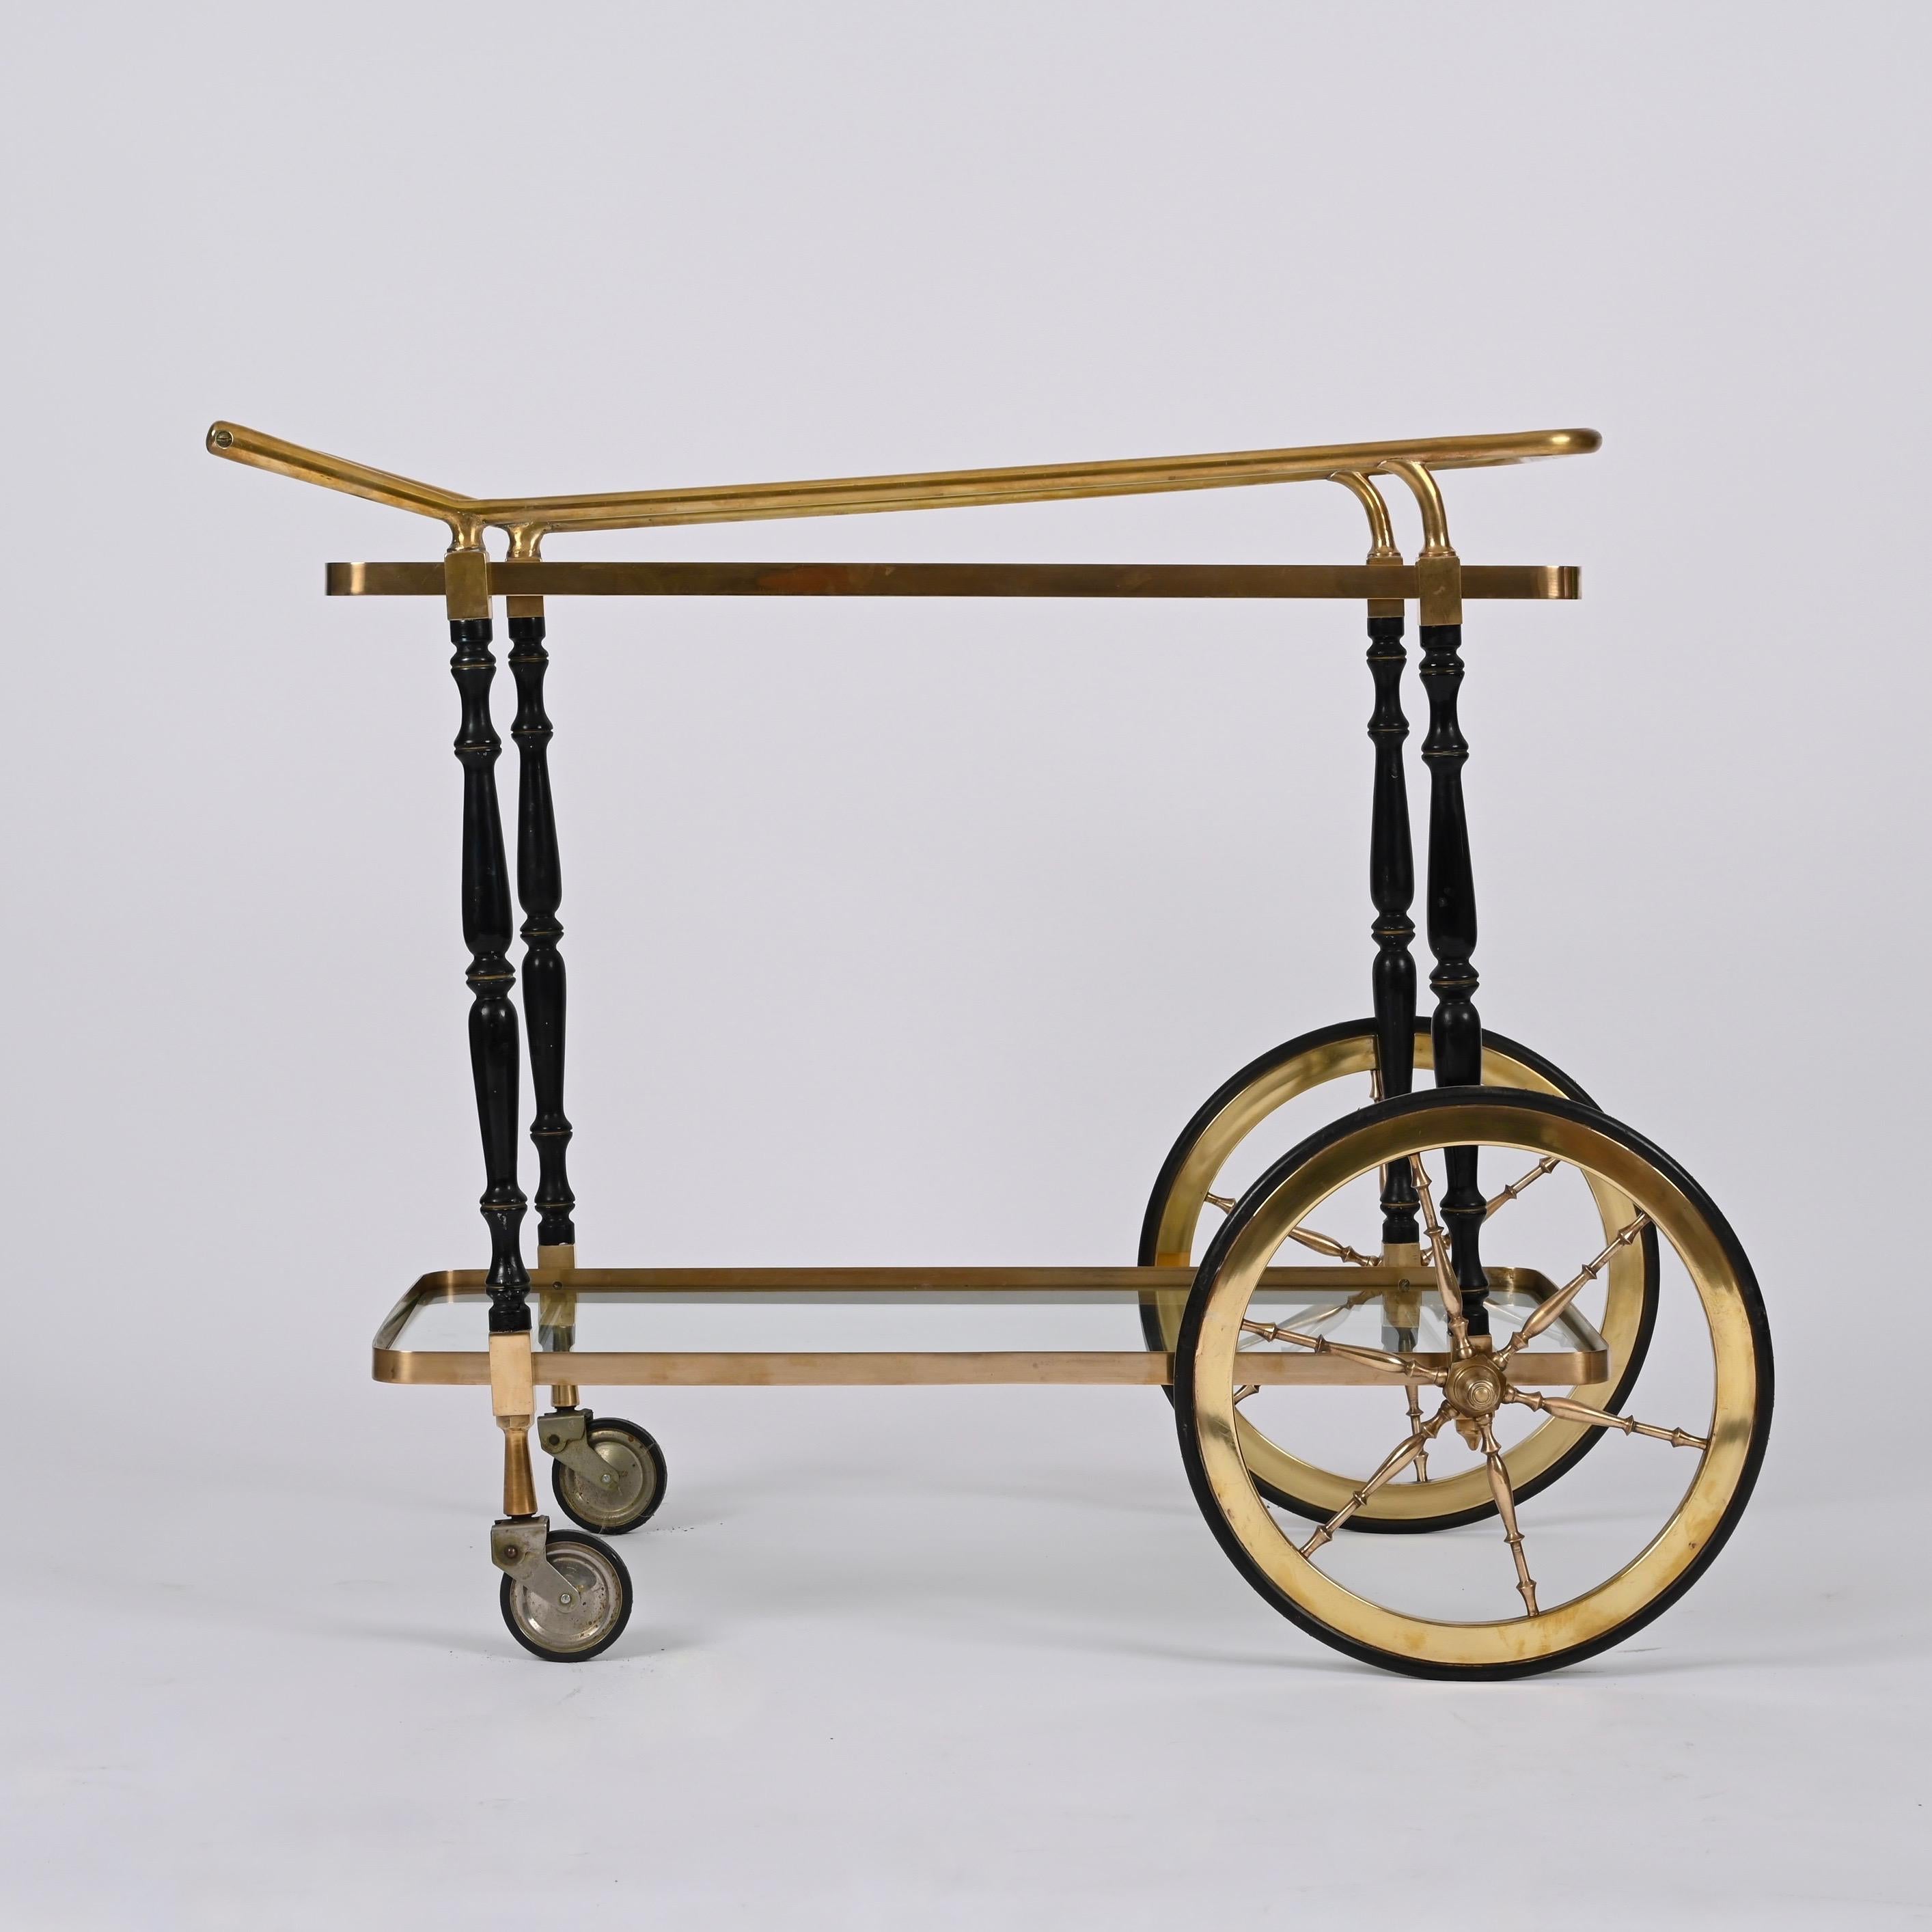 Midcentury Cesare Lacca Brass and Black Lacquer Wood Italian Bar Cart, 1950s For Sale 2